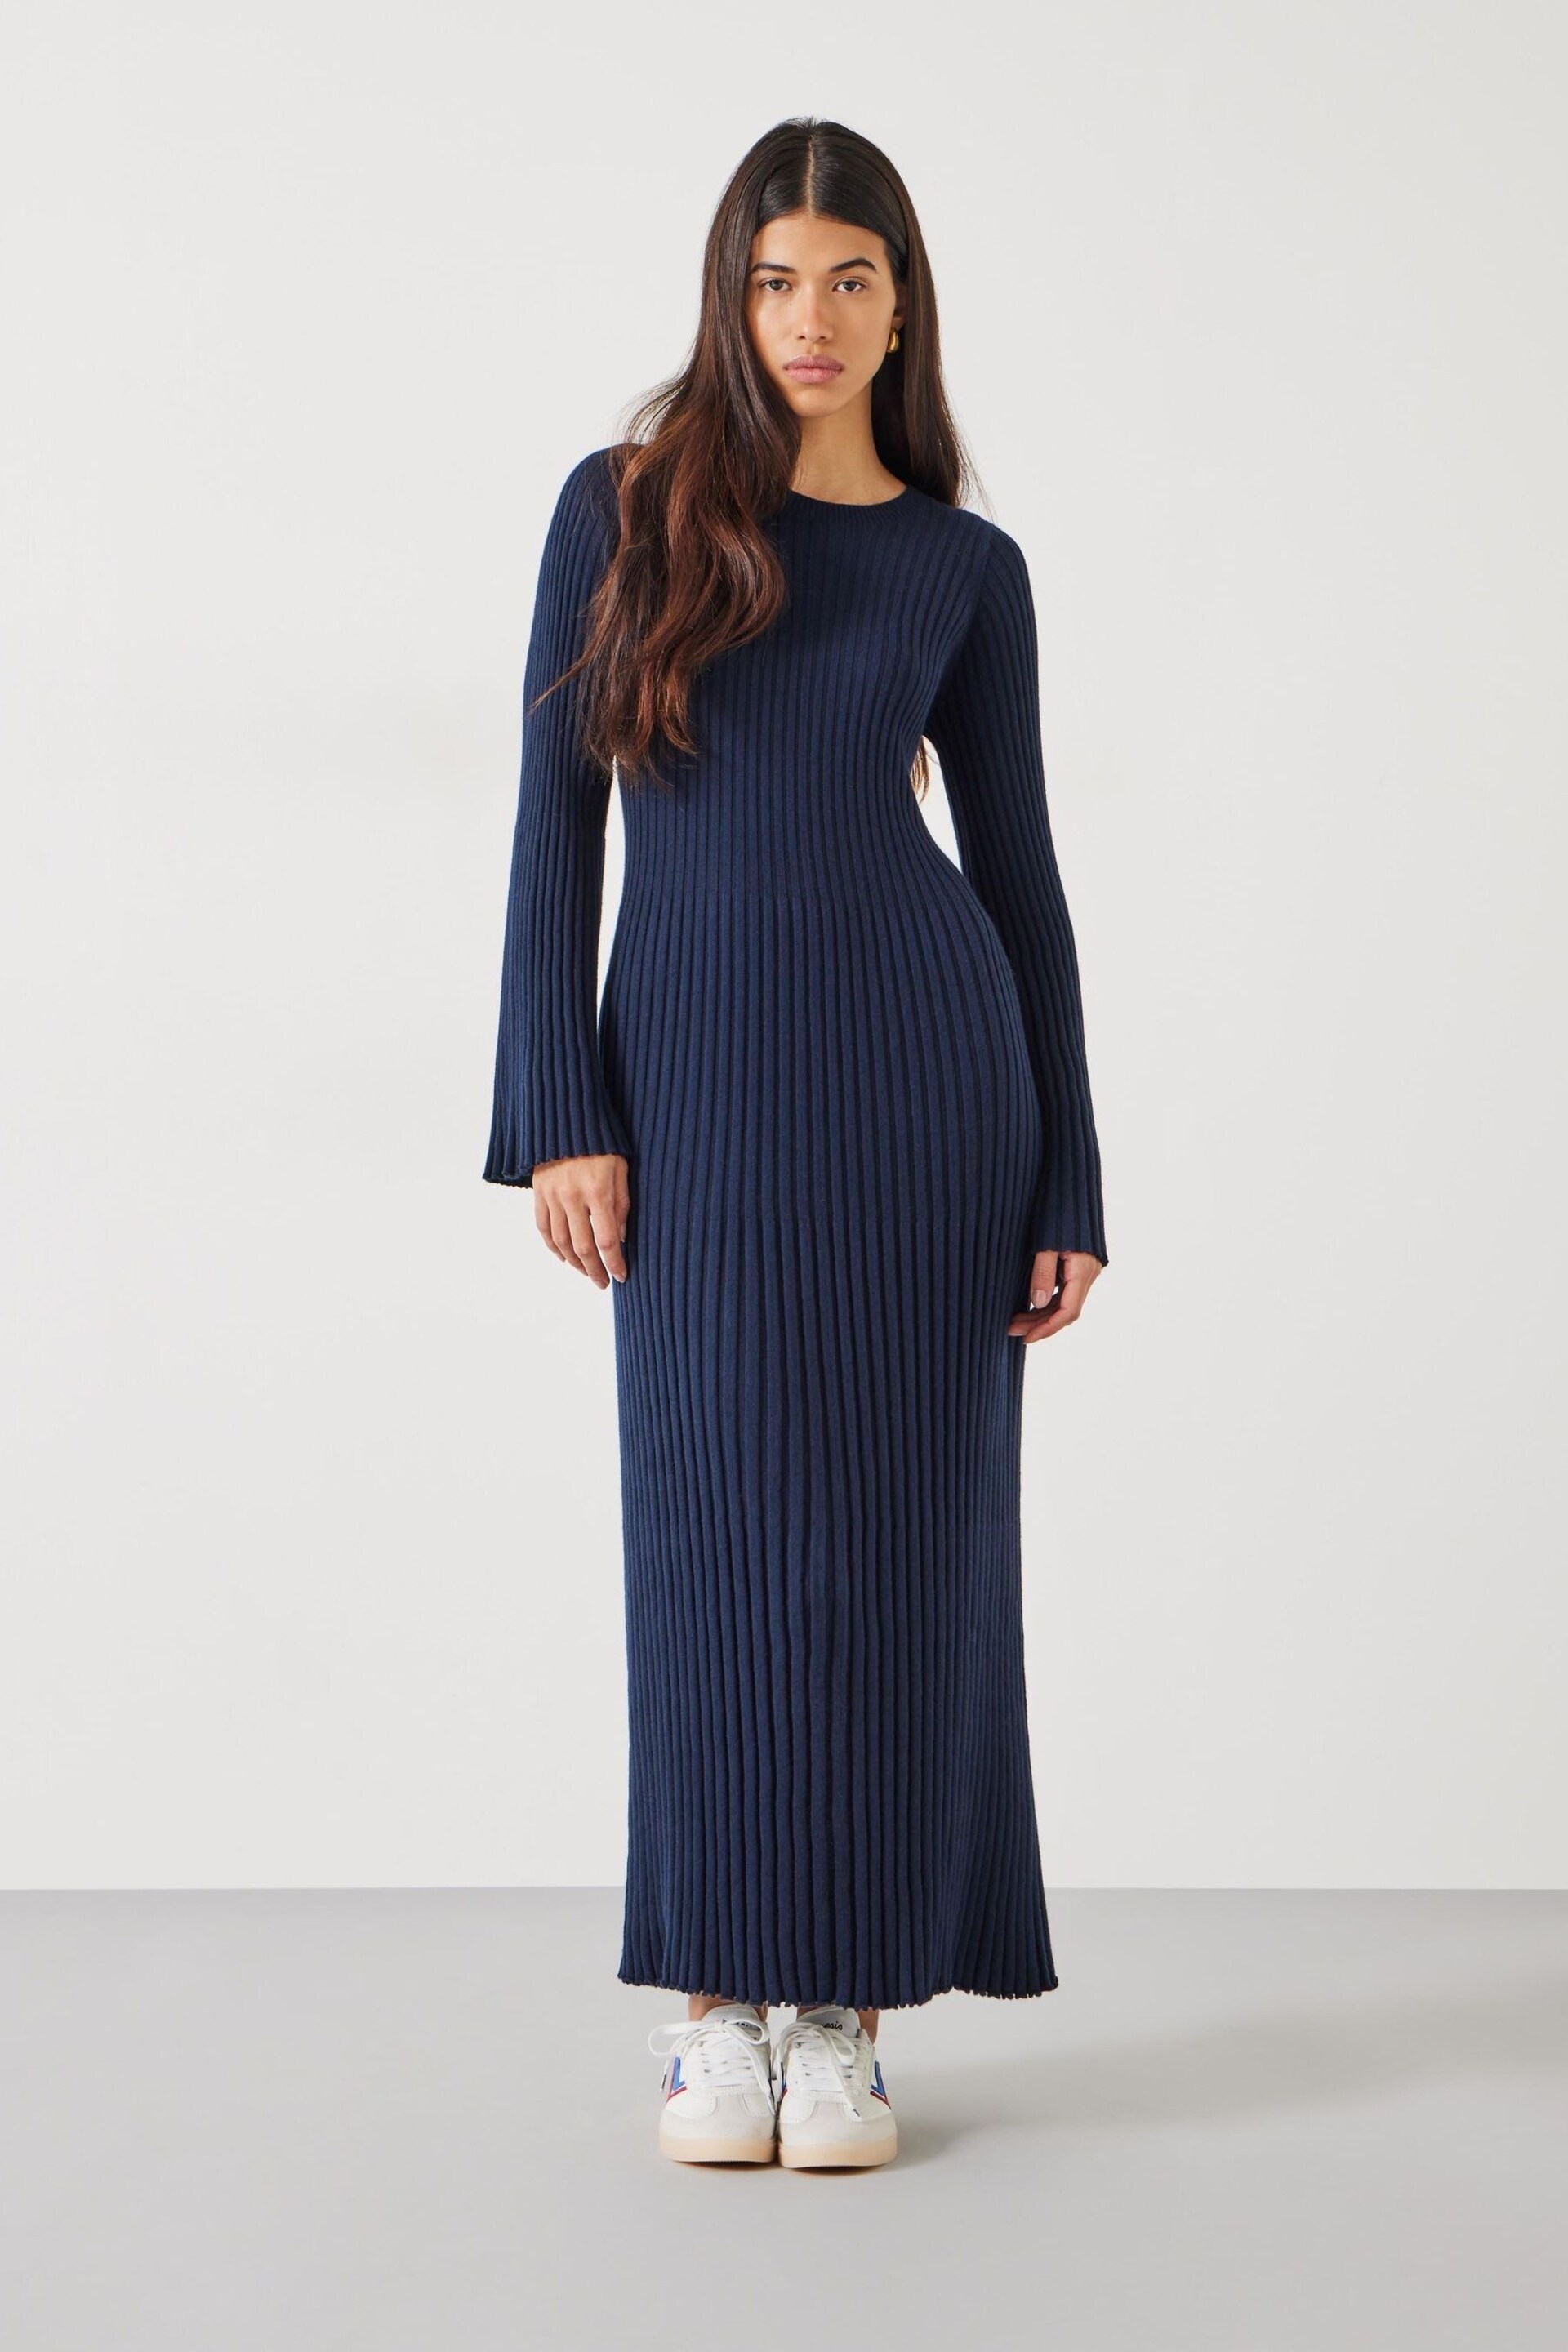 Hush Blue Penny Crew Neck Ribbed Knitted Dress - Image 1 of 5